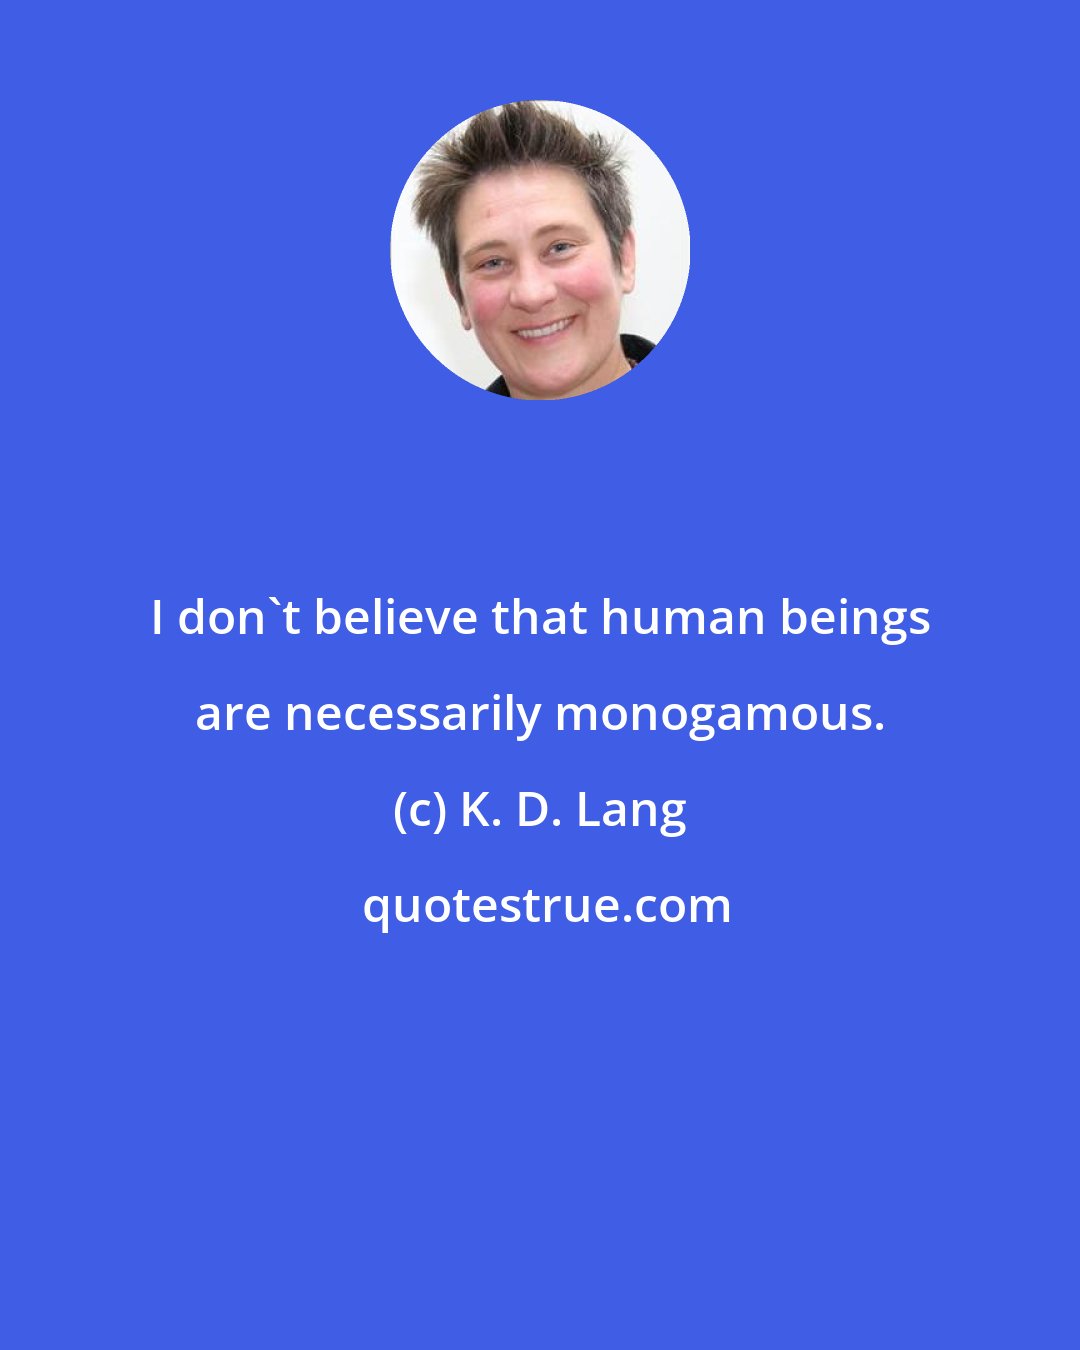 K. D. Lang: I don't believe that human beings are necessarily monogamous.